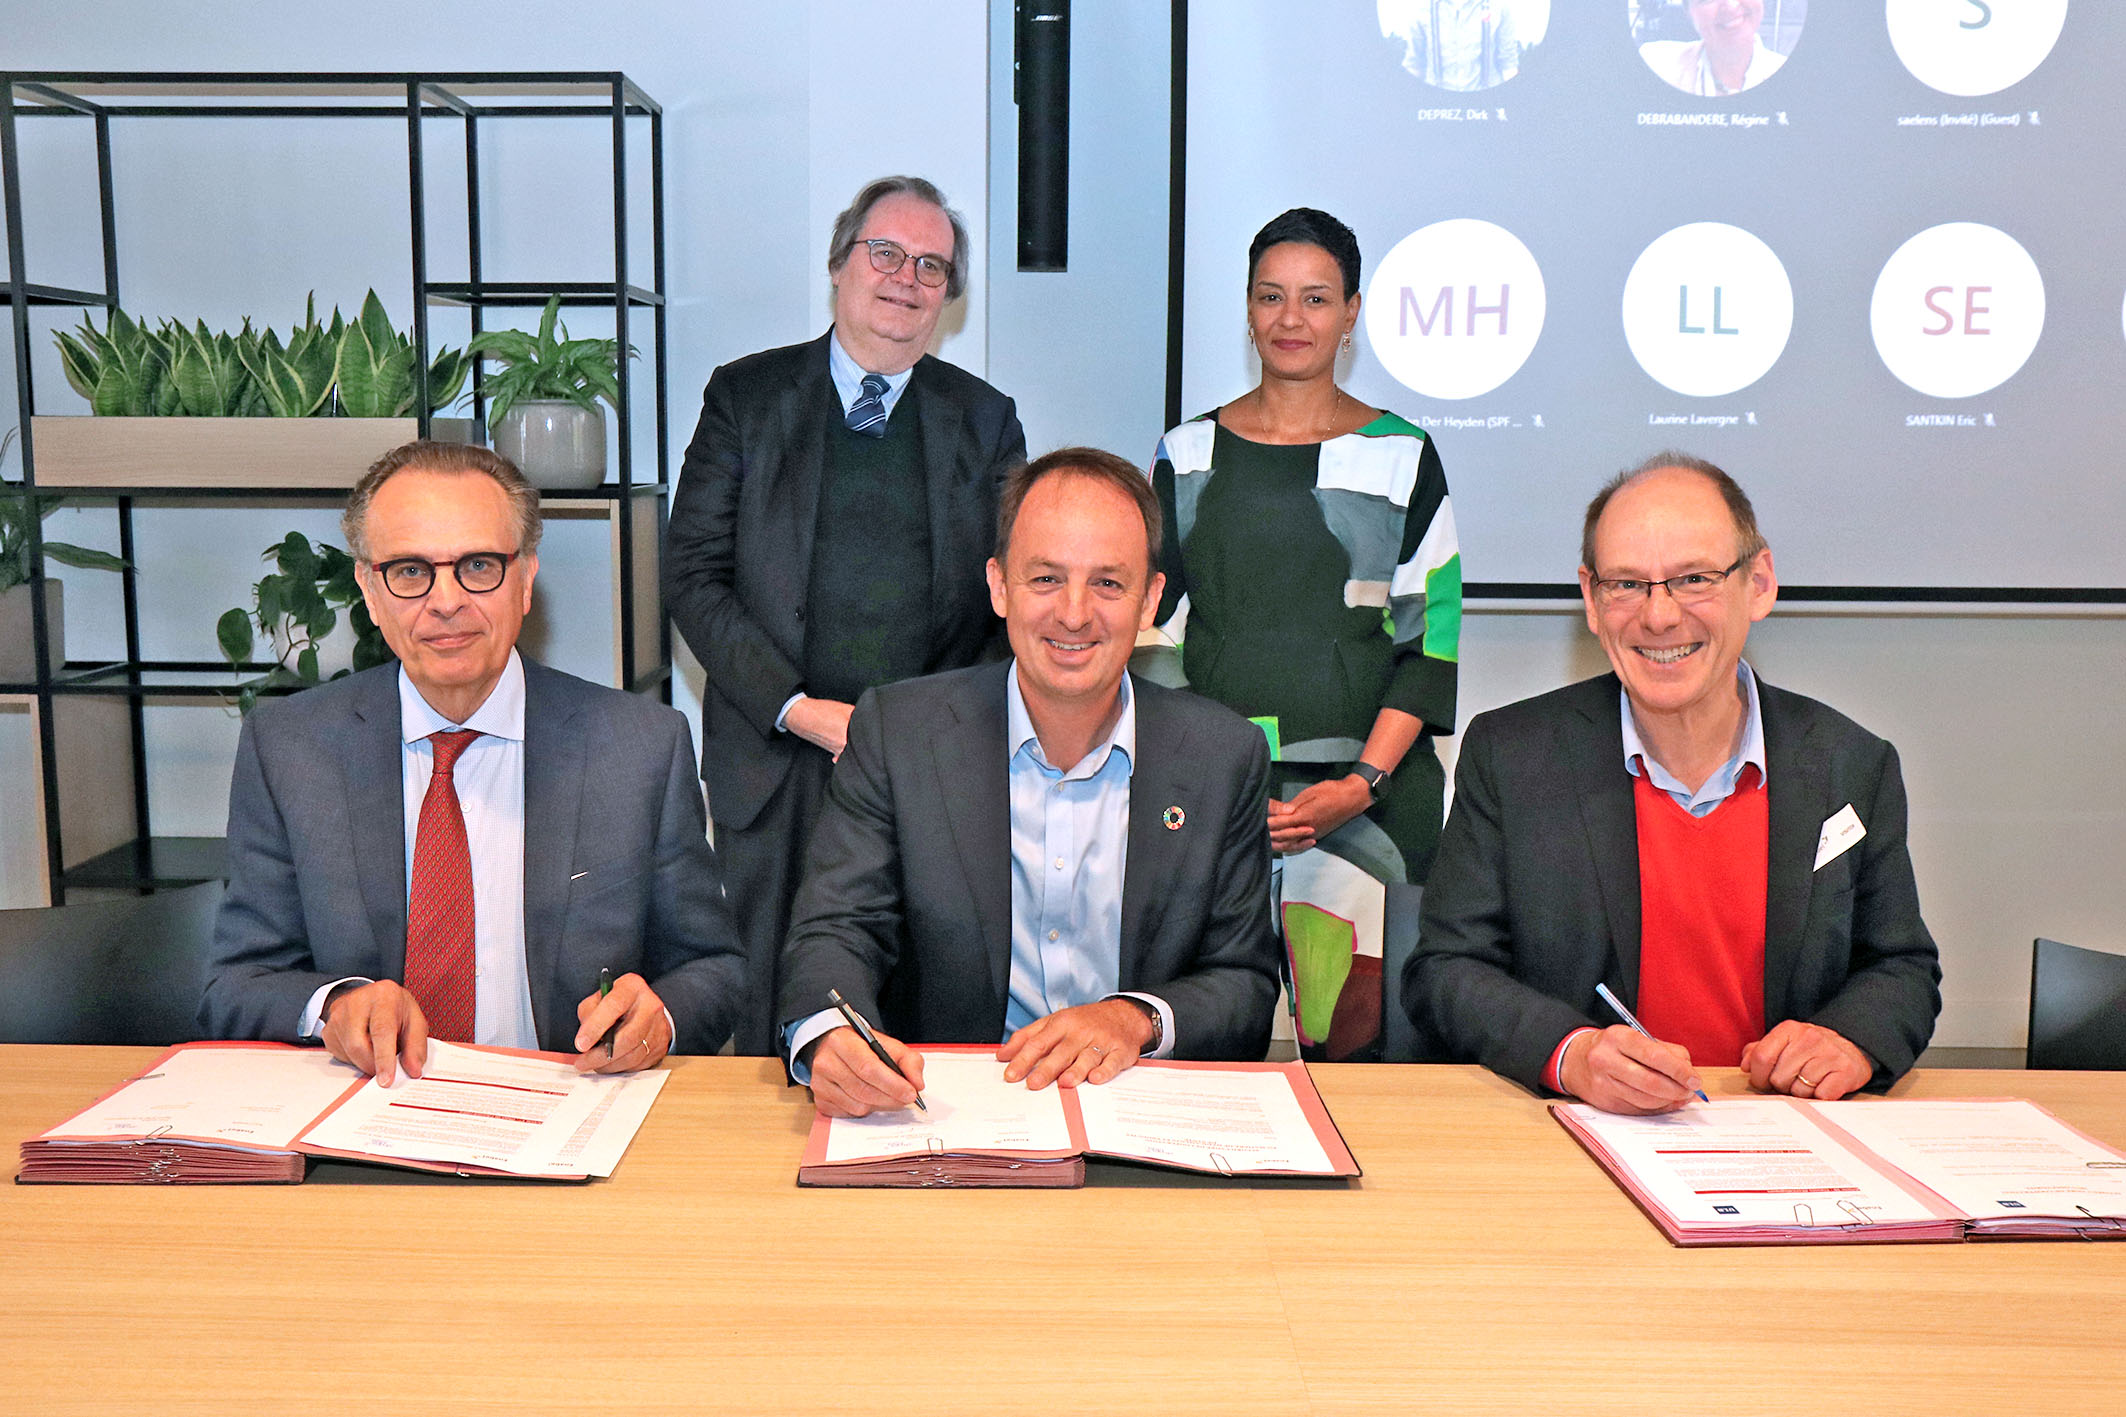 Representatives of Enabel, ULB and FAMHP signing the agreement